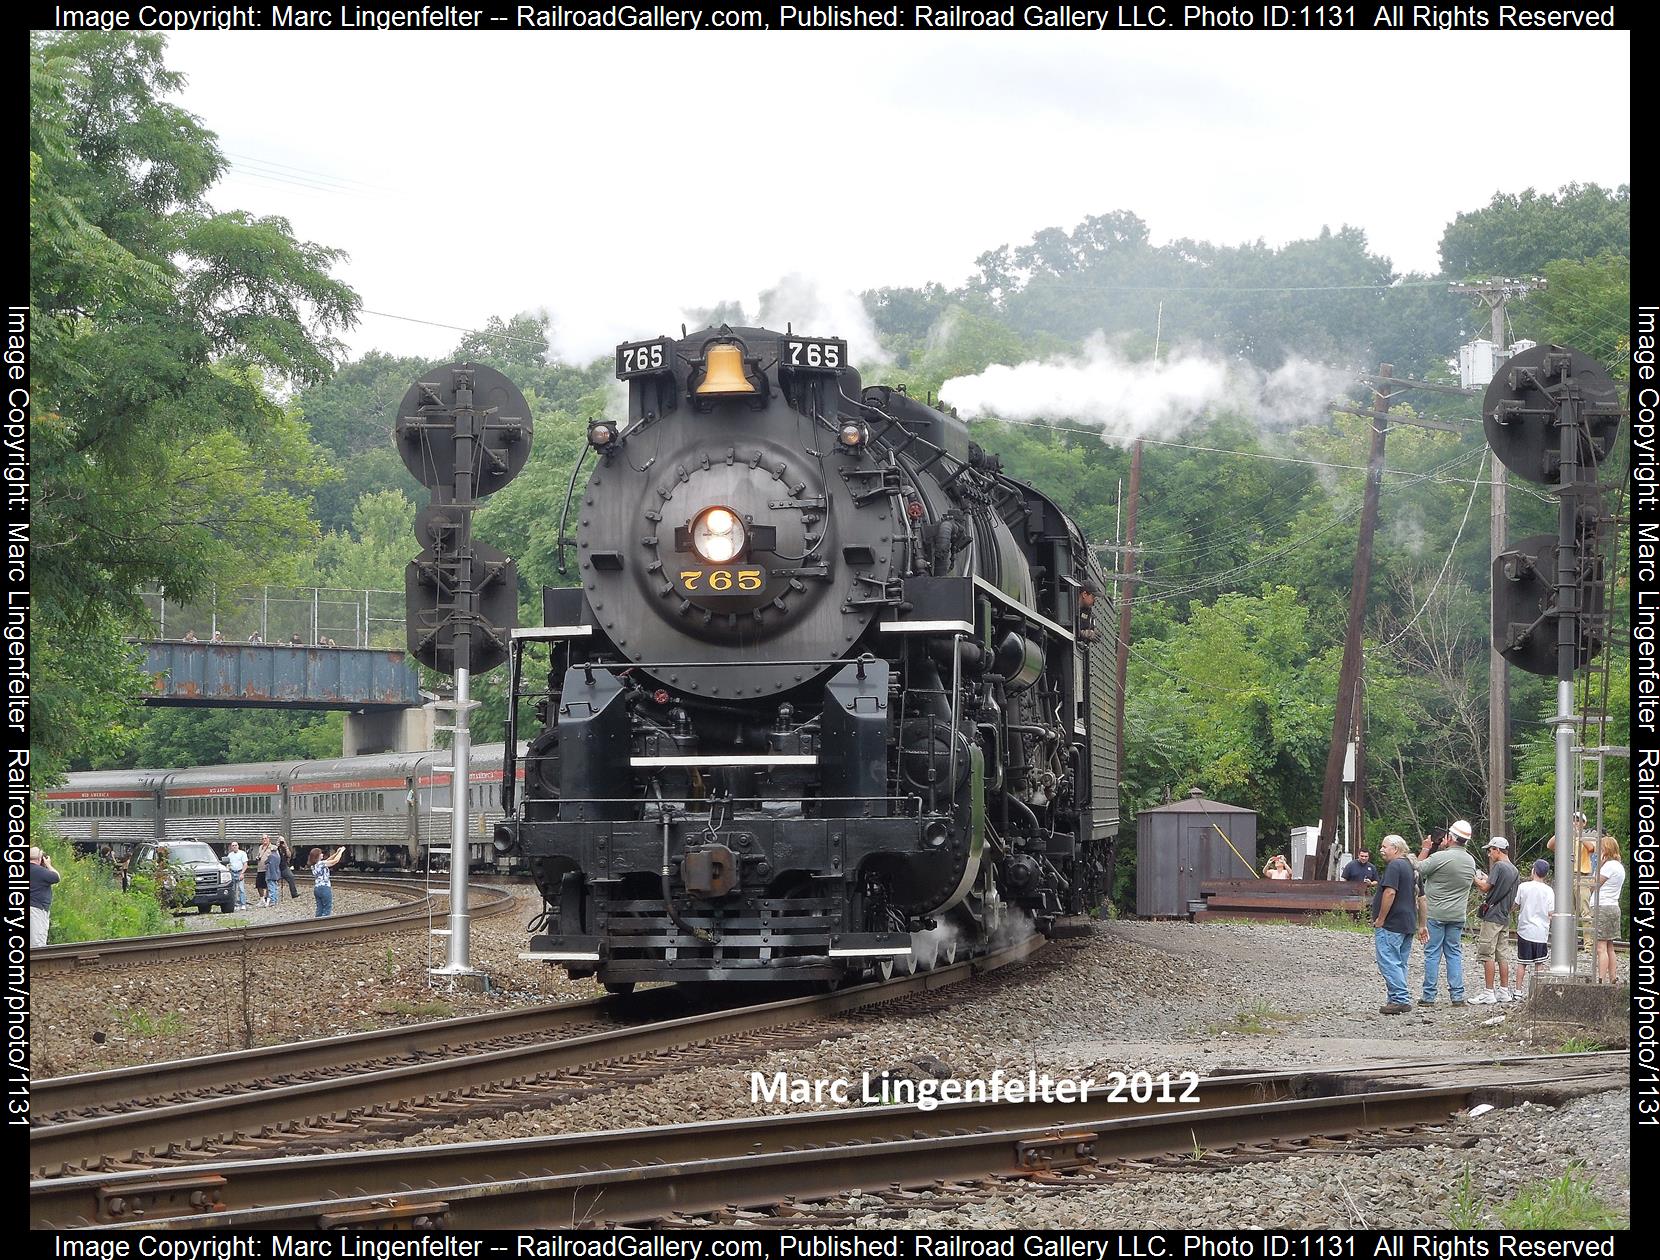 NKP 765 is a class Steam 2-8-4 and  is pictured in Homewood Jct, Pennsylvania, USA.  This was taken along the N Fort Wayne Line on the Nickel Plate Road. Photo Copyright: Marc Lingenfelter uploaded to Railroad Gallery on 06/12/2023. This photograph of NKP 765 was taken on Sunday, August 12, 2012. All Rights Reserved. 